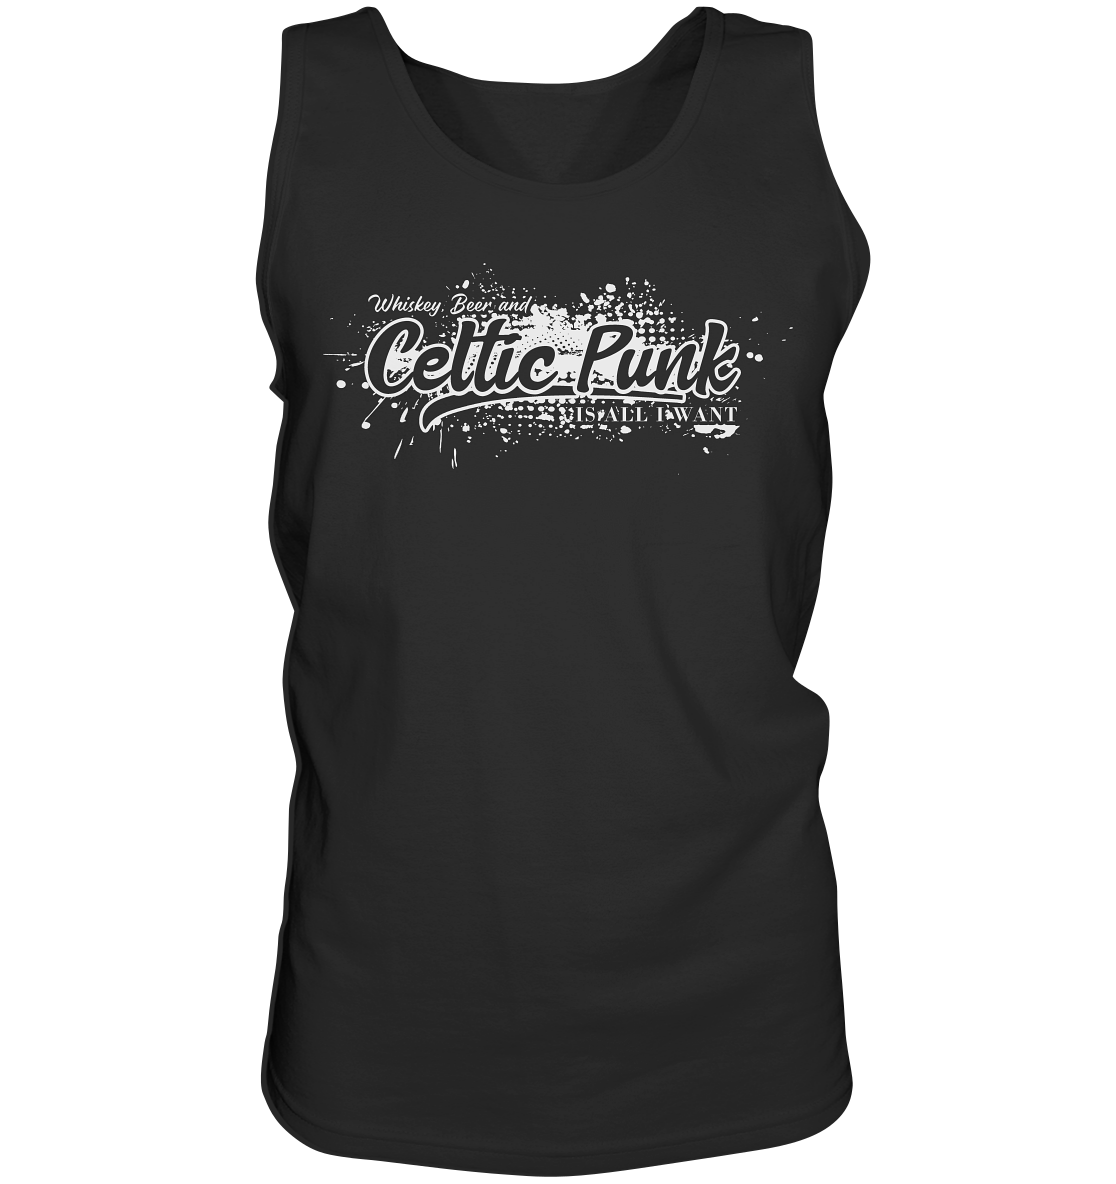 Whiskey, Beer And Celtic Punk "Is All I Want" - Tank-Top